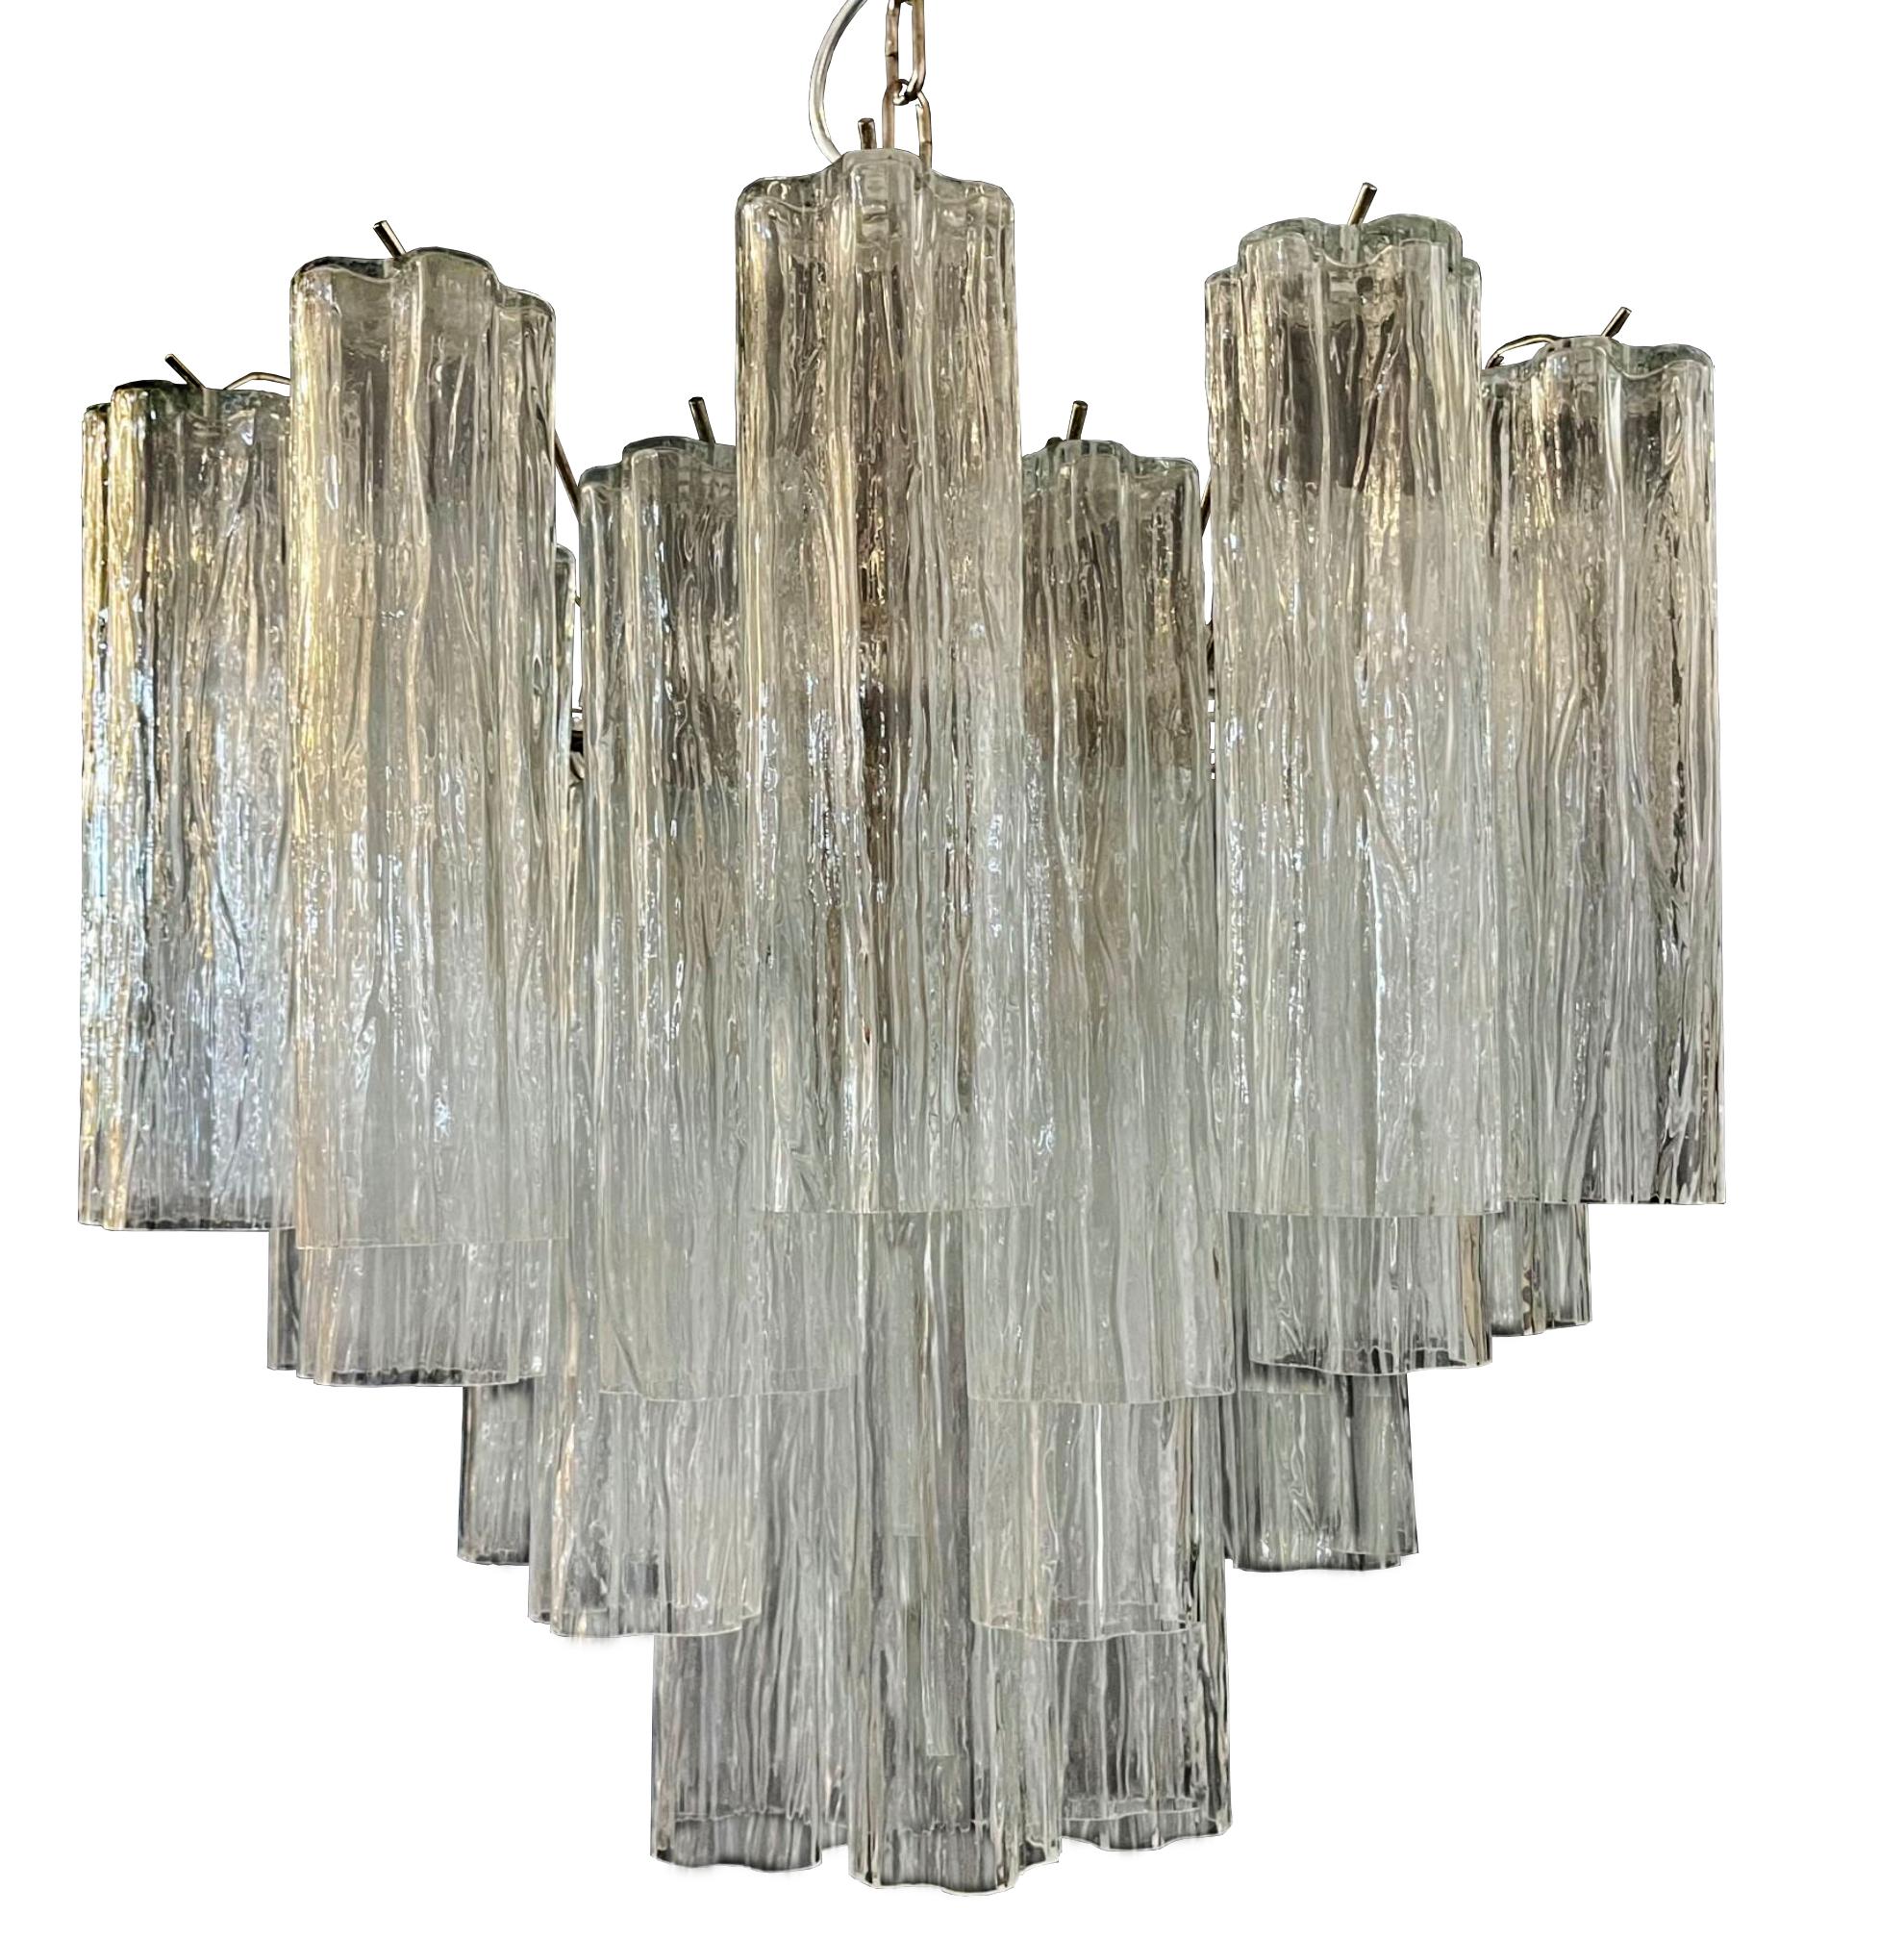 Fantastic Murano Glass Tube Chandelier - 36 glass tube
Italian vintage chandelier in Murano glass and nickel-plated metal structure. The armor polished nickel supports 36 large clear glass tubes in a star shape.
Period:late XX century
Dimensions: